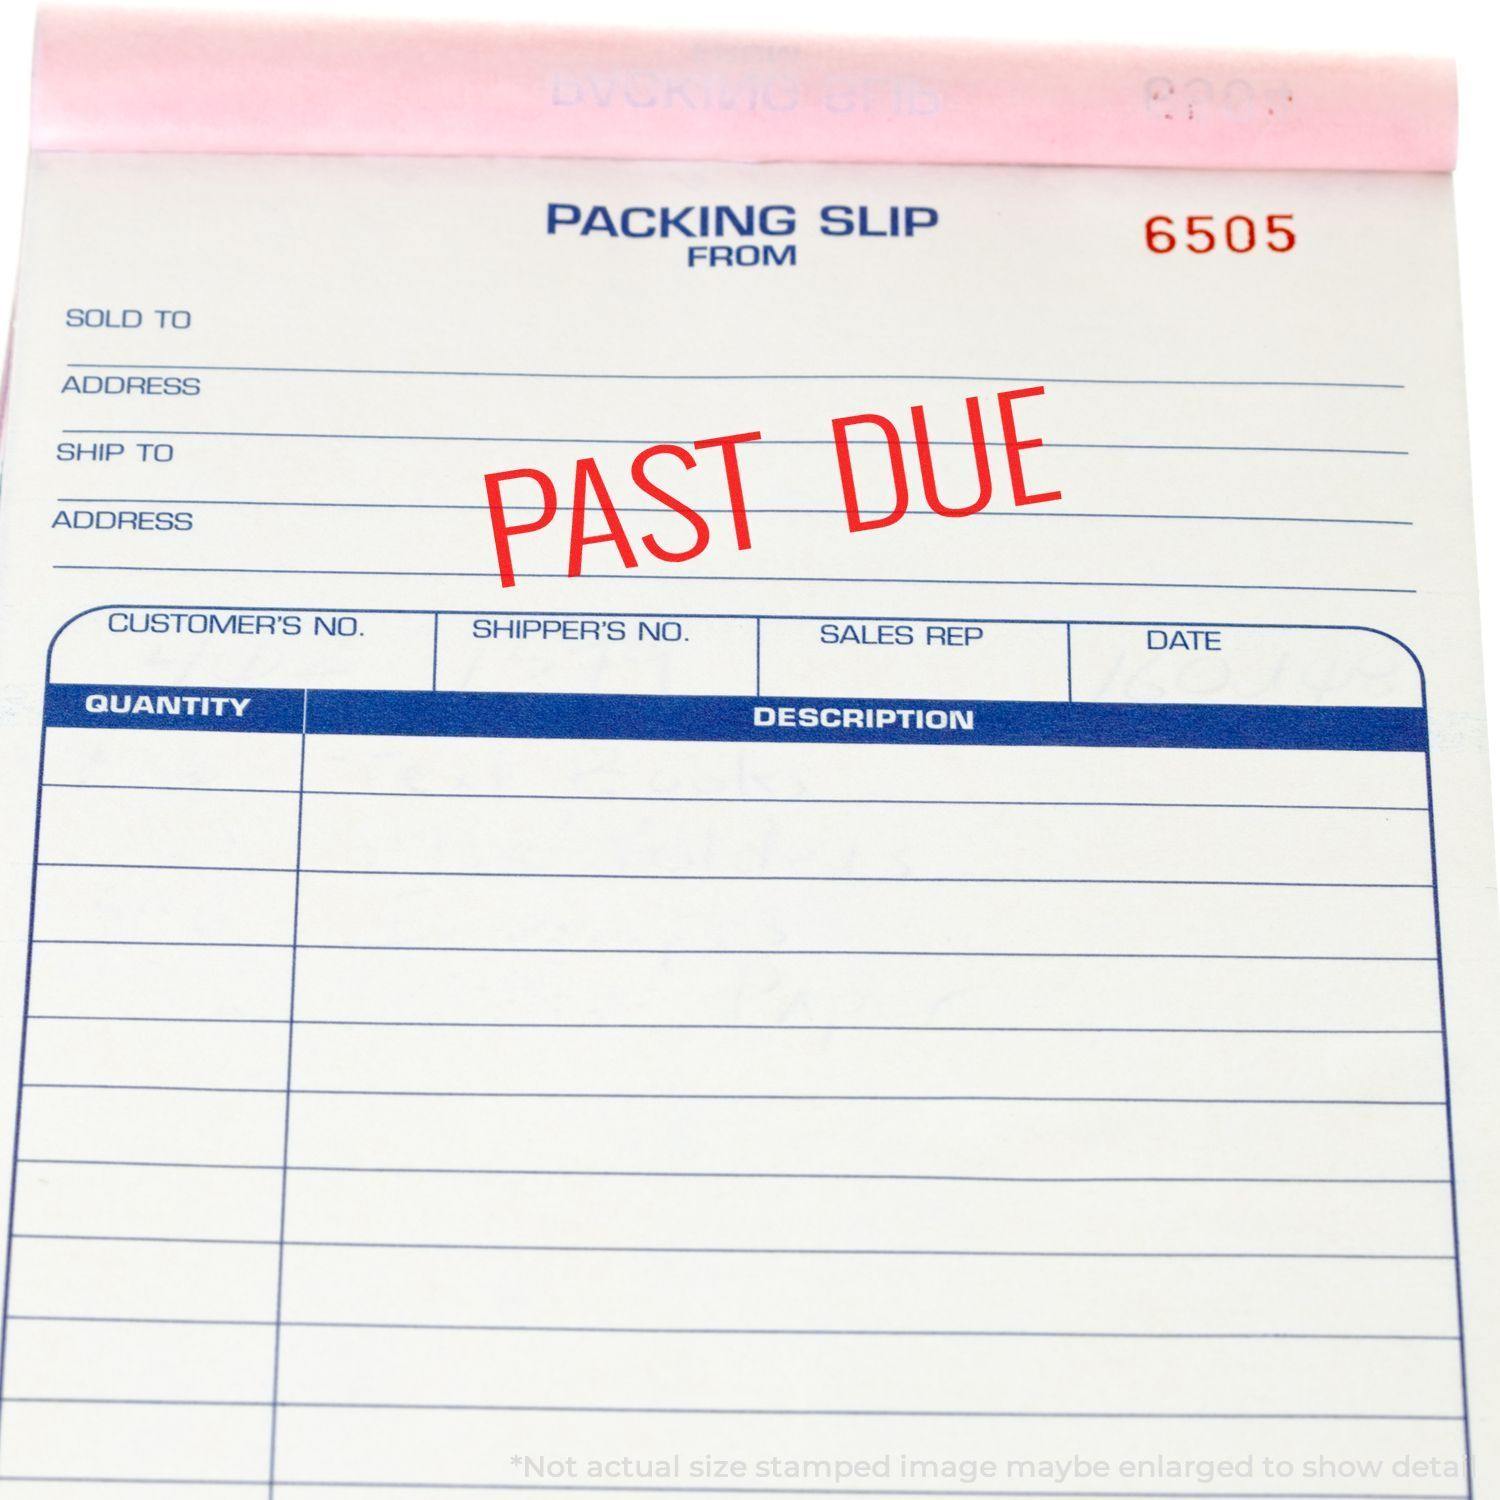 A stock office rubber stamp with a stamped image showing how the text "PAST DUE" in a large narrow font is displayed after stamping.